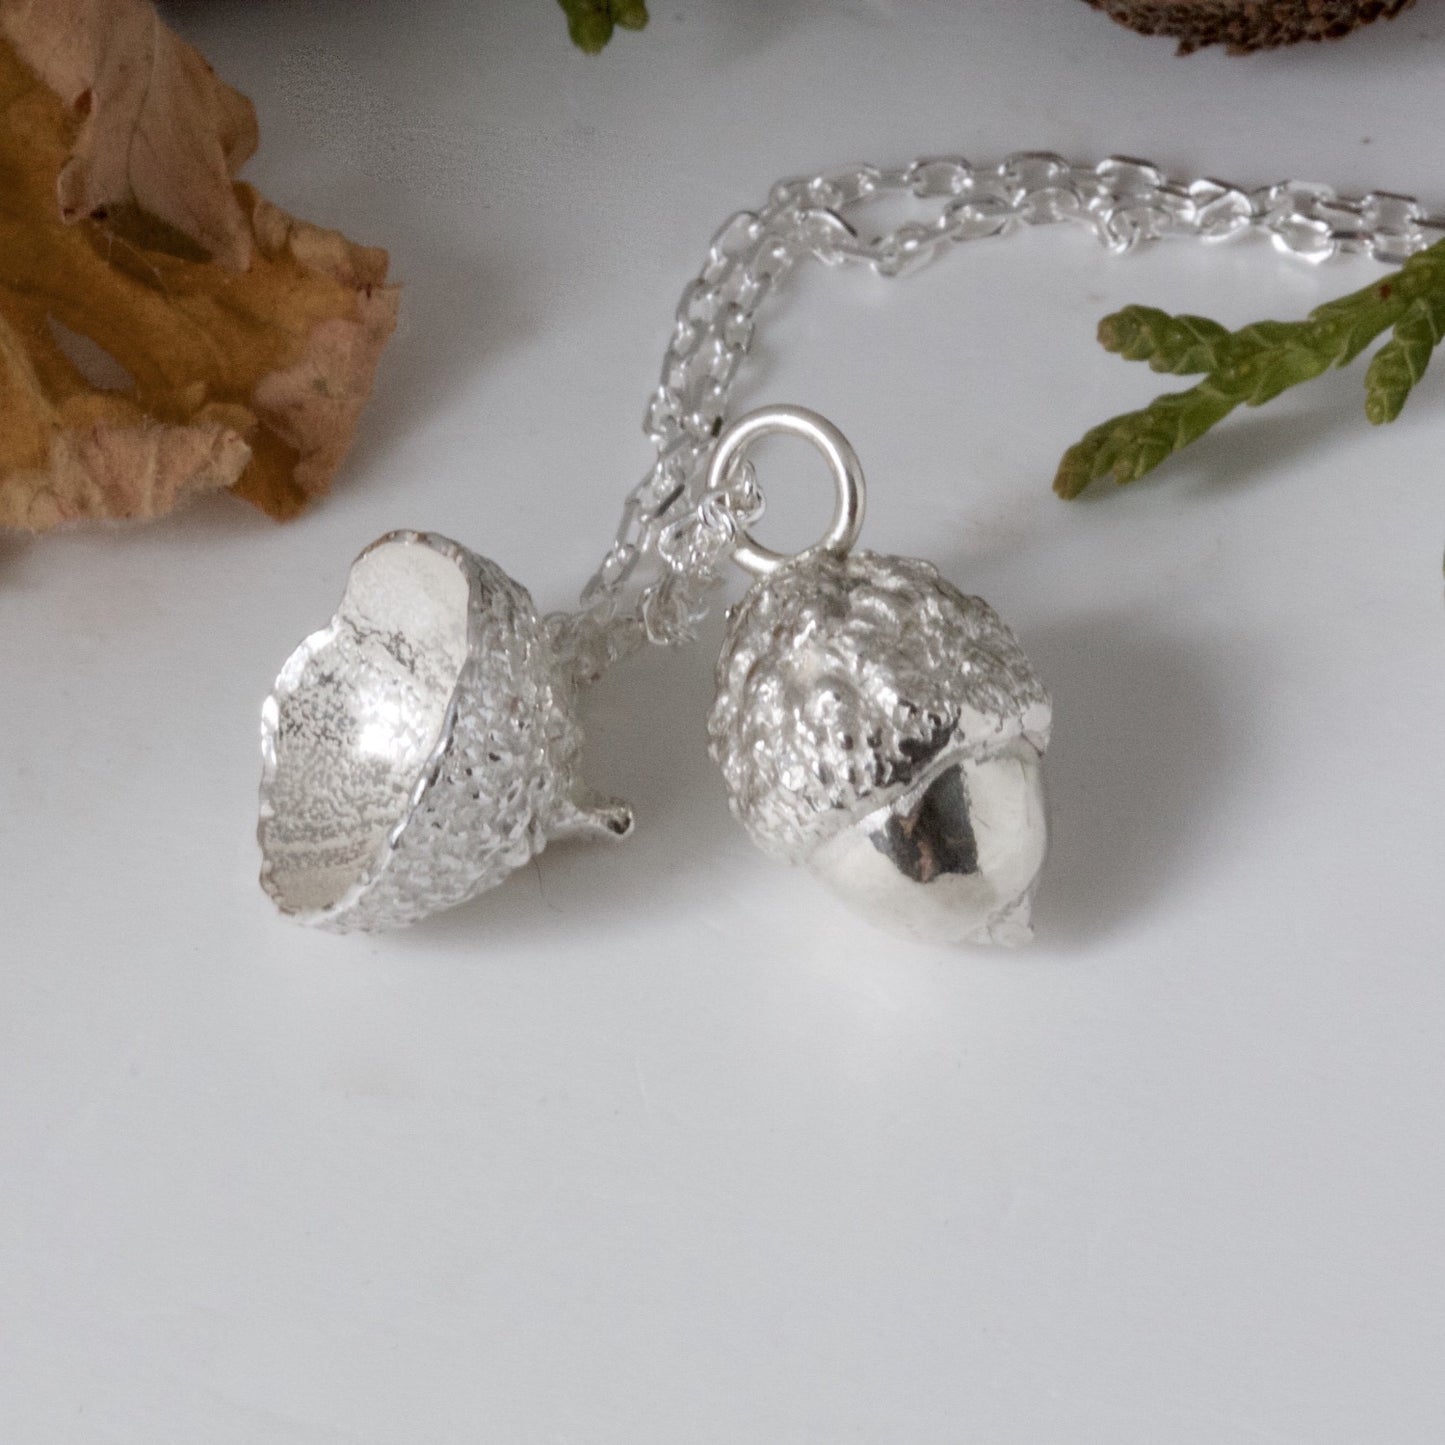 acorn and acorn cup necklace